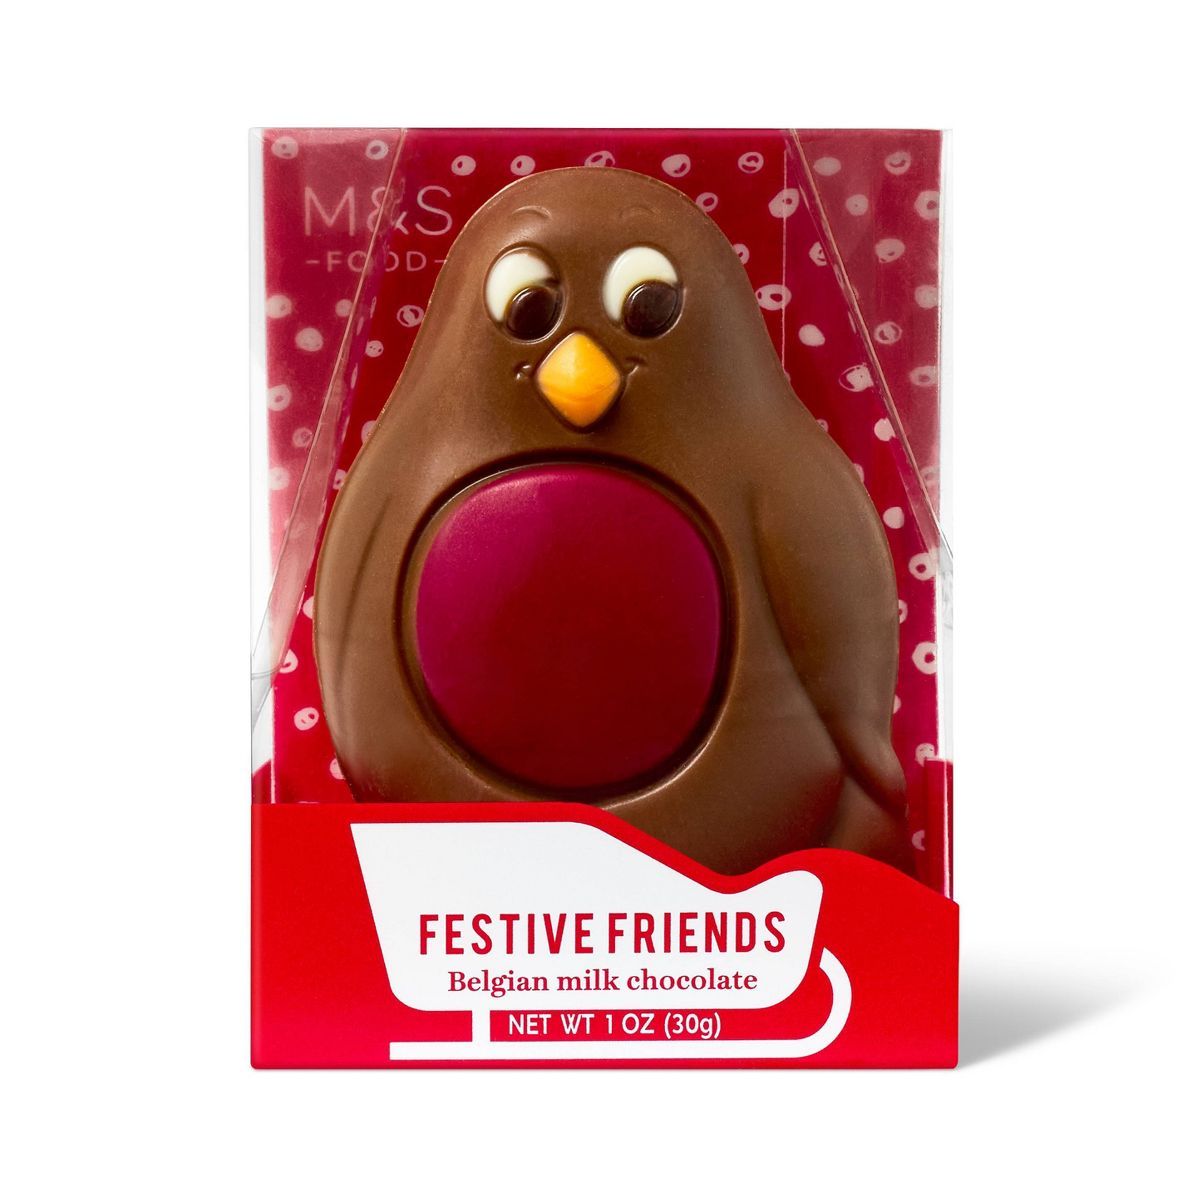 M&S Milk Chocolate Festive Friends - 1oz - Shapes May Vary | Target